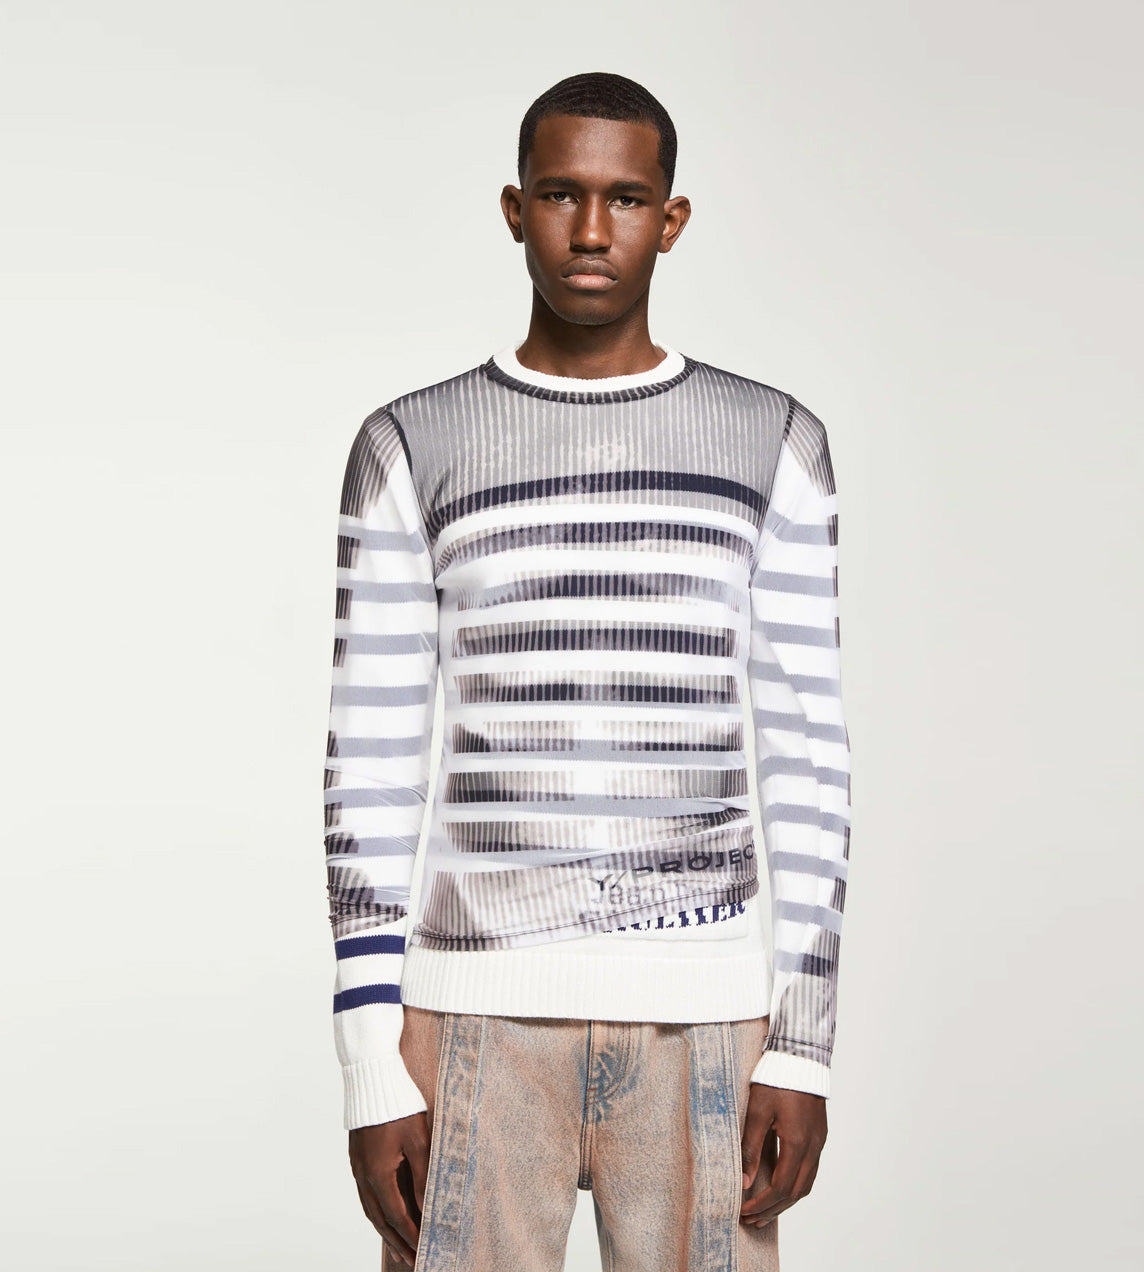 Y/Project - JPG Mariniere Mesh Cover Sweater